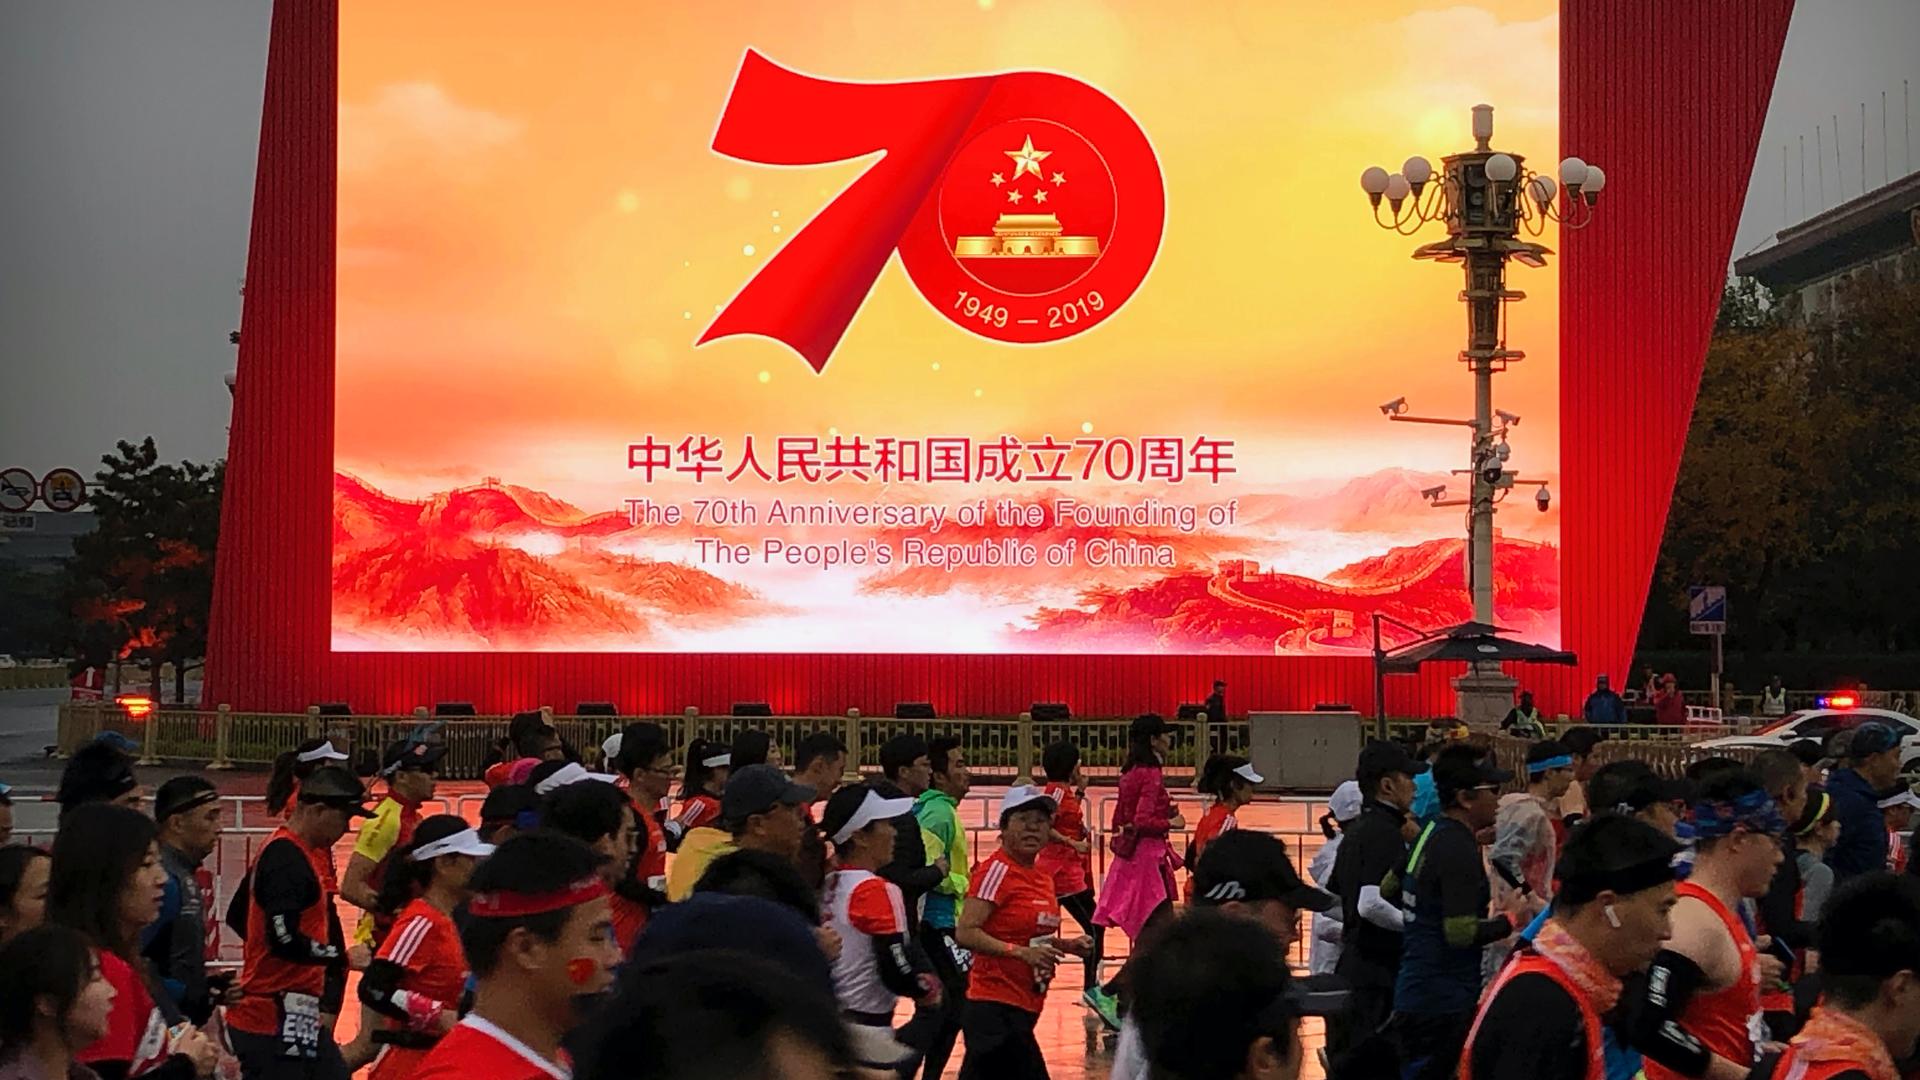 Runners pass by a large video screen commemorating the 70th anniversary of the founding of Communist China during the Beijing Marathon in Beijing, Nov. 3, 2019.